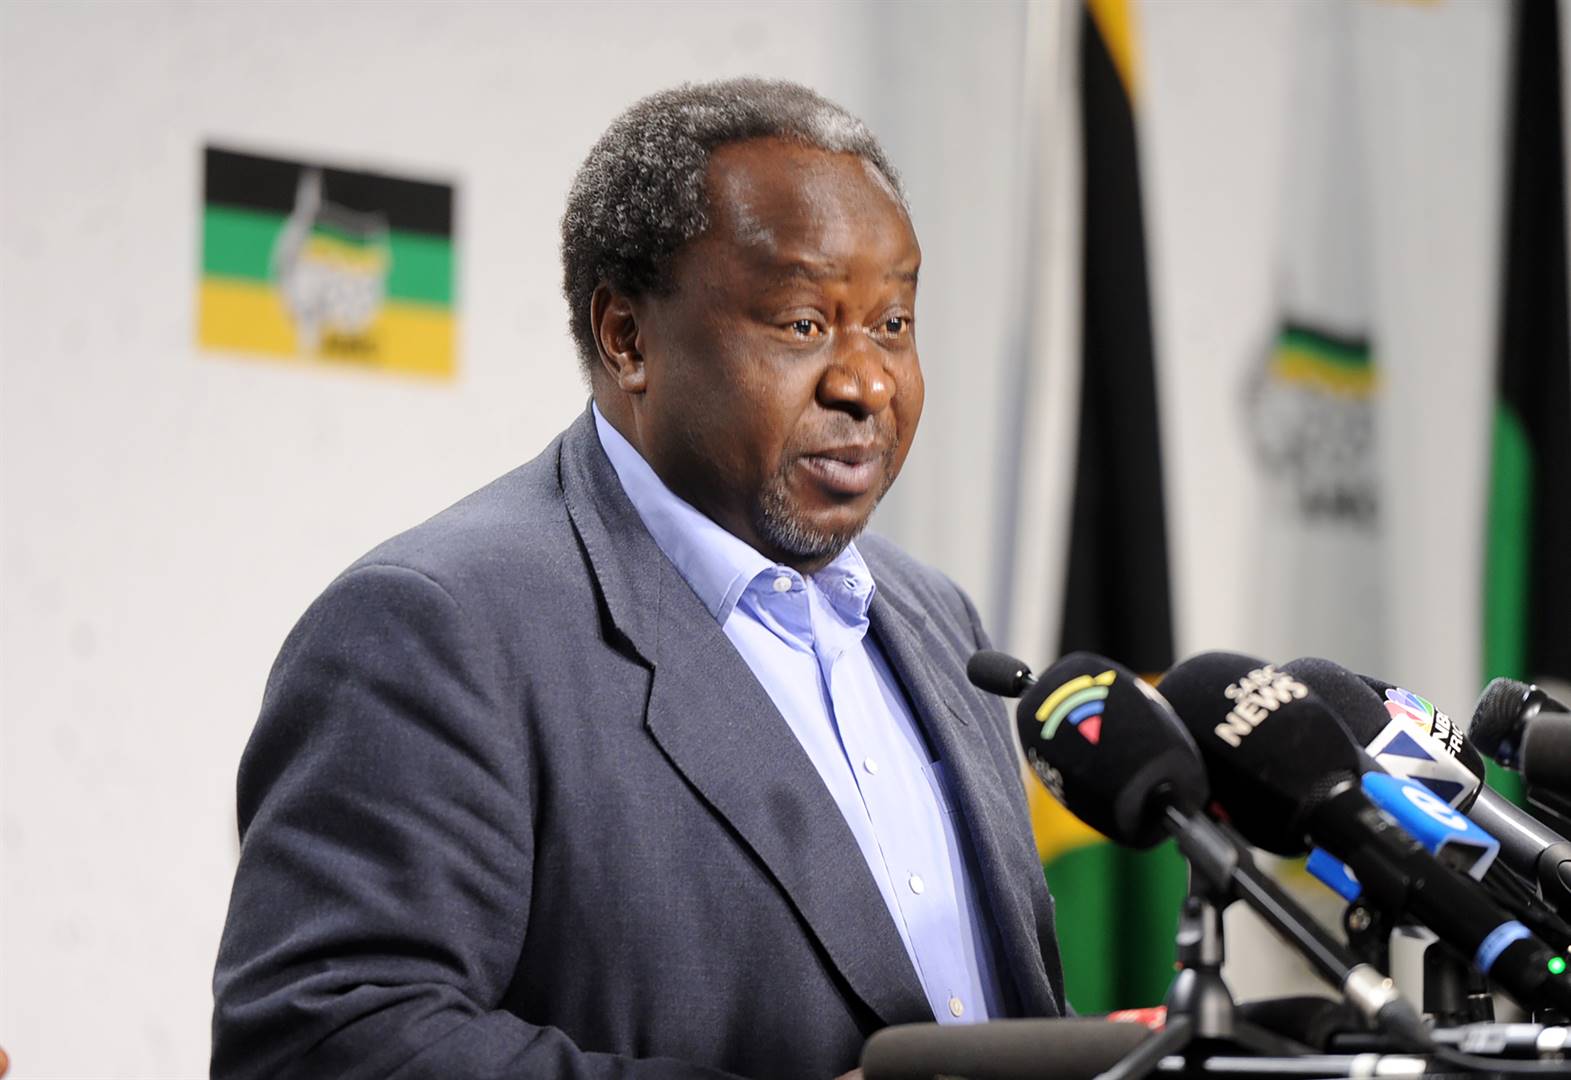 Tito Mboweni says without fixing the dysfunctional municipalities, potholes and reducing reliance on Eskom, South Africa can forget about meaningful economic growth. 